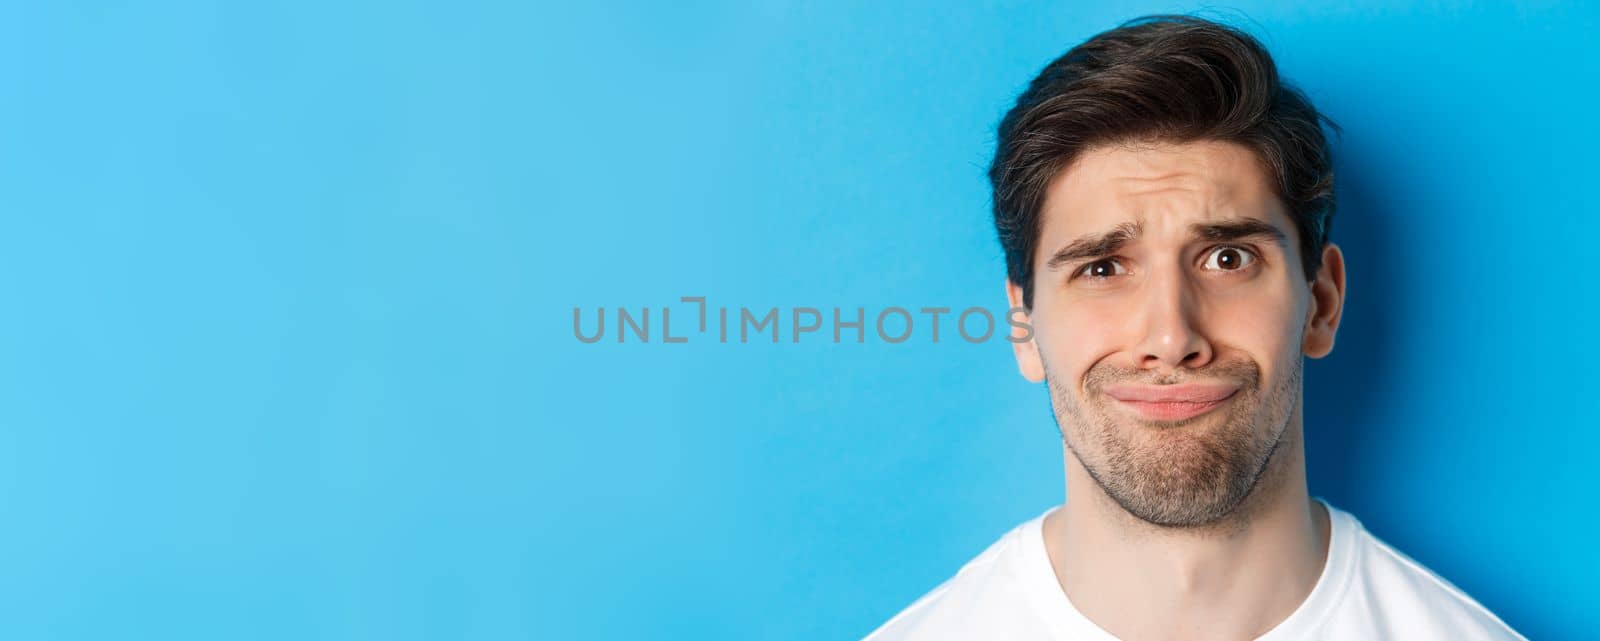 Head shot of skeptical and disappointed man, grimacing complicated, standing against blue background.